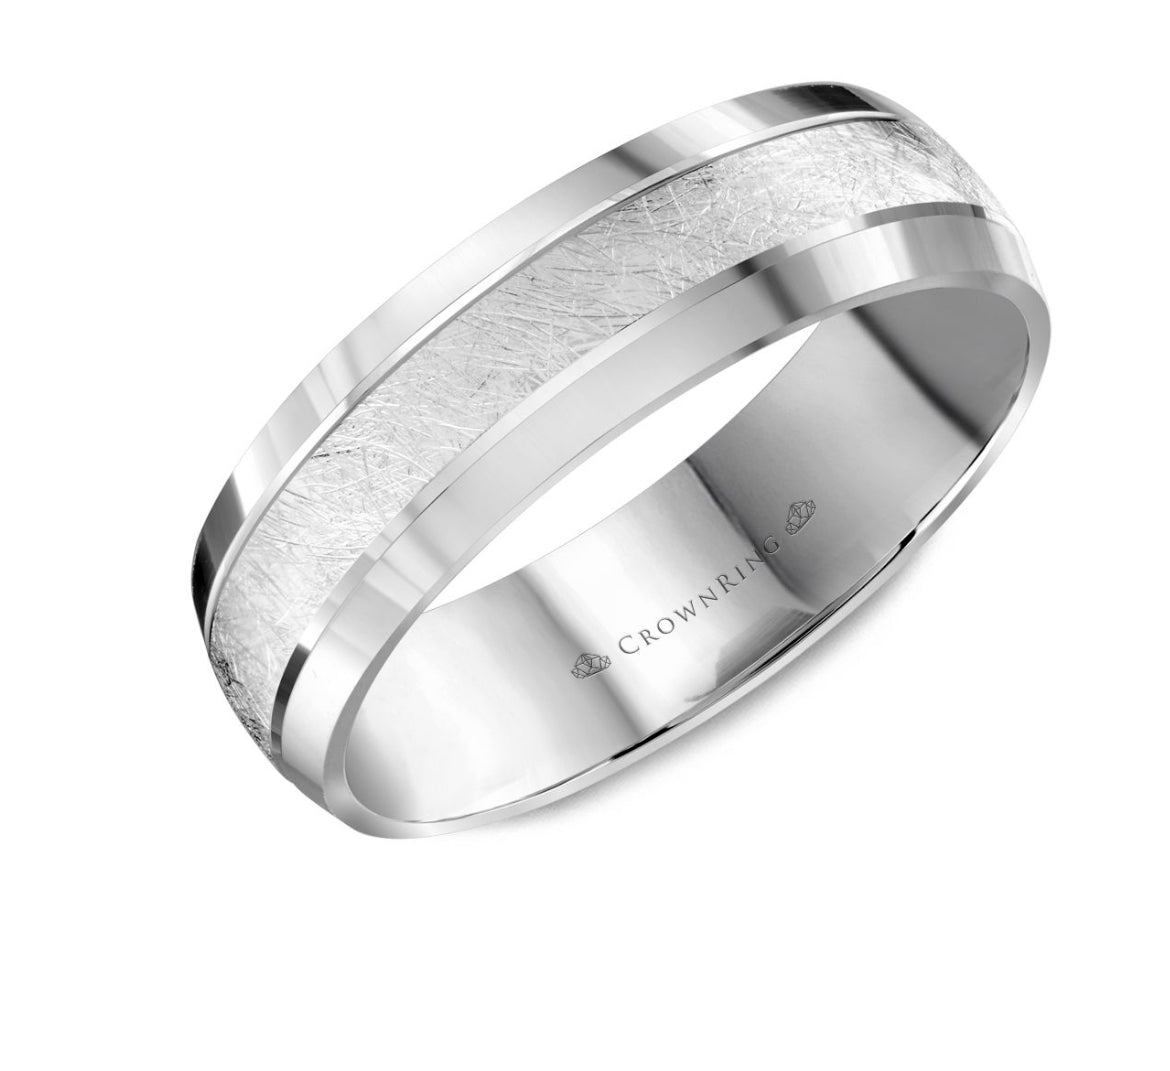 CrownRing Collection - 14k White Gold Diamond Brushed Band with Beveled Edge